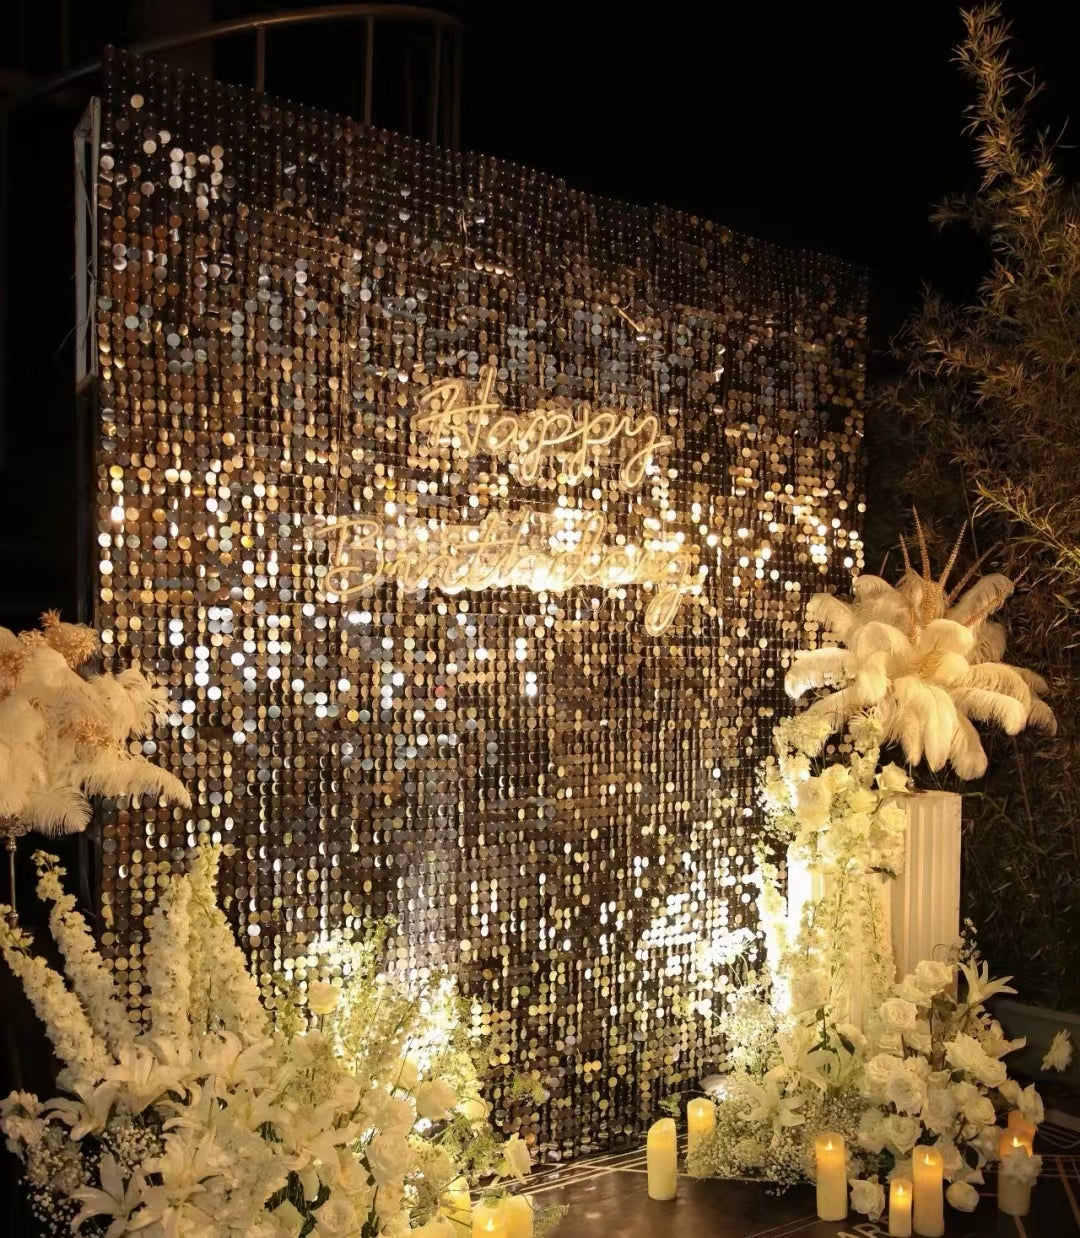 Event Party Decoration Sequin Shimmer Wall Panel